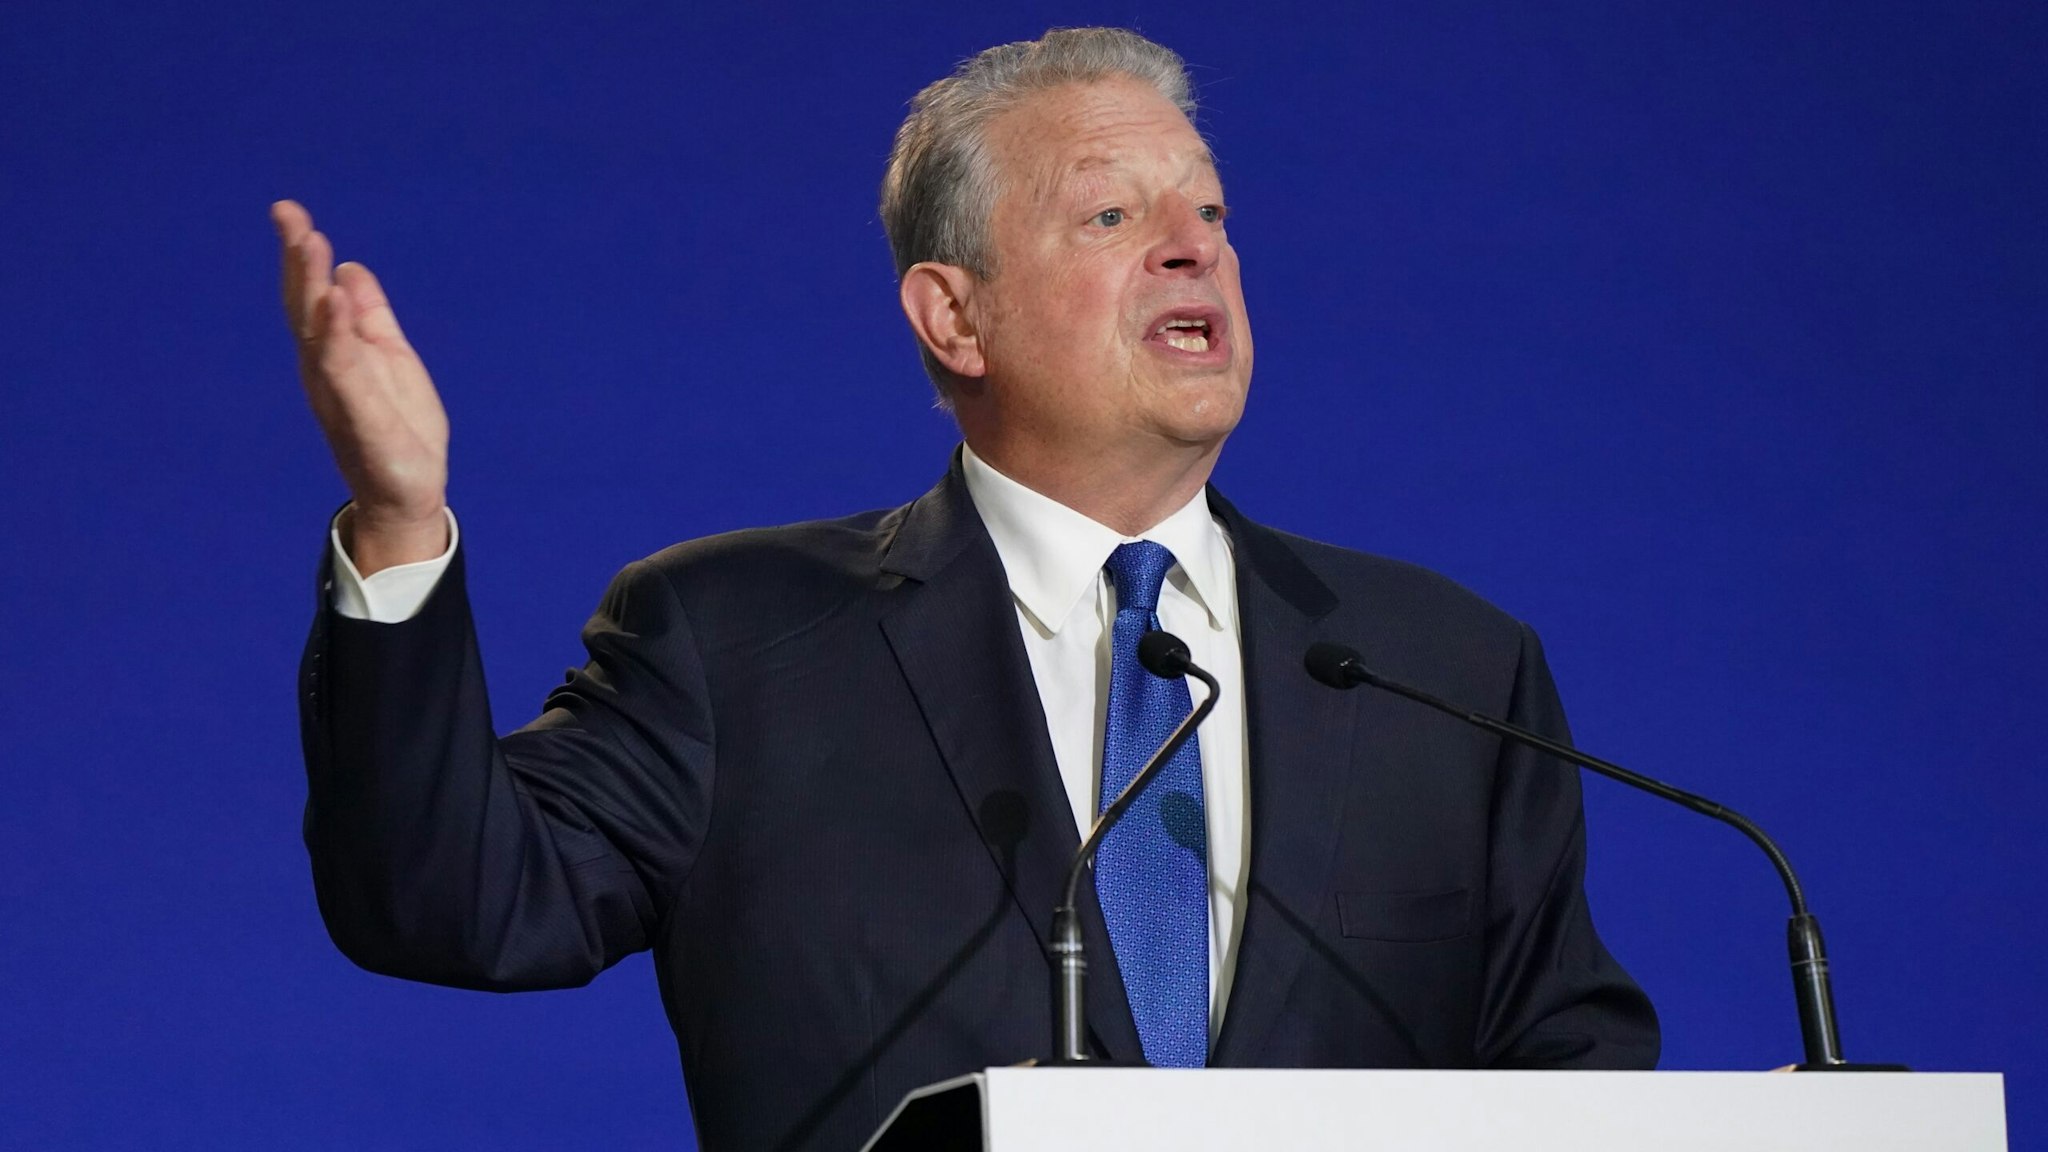 GLASGOW, SCOTLAND - NOVEMBER 05: Al Gore speaks during the "Destination 2030: Making 1.5C A Reality" event on day six of the Cop 26 Summit at the SEC on November 05, 2021 in Glasgow, Scotland.